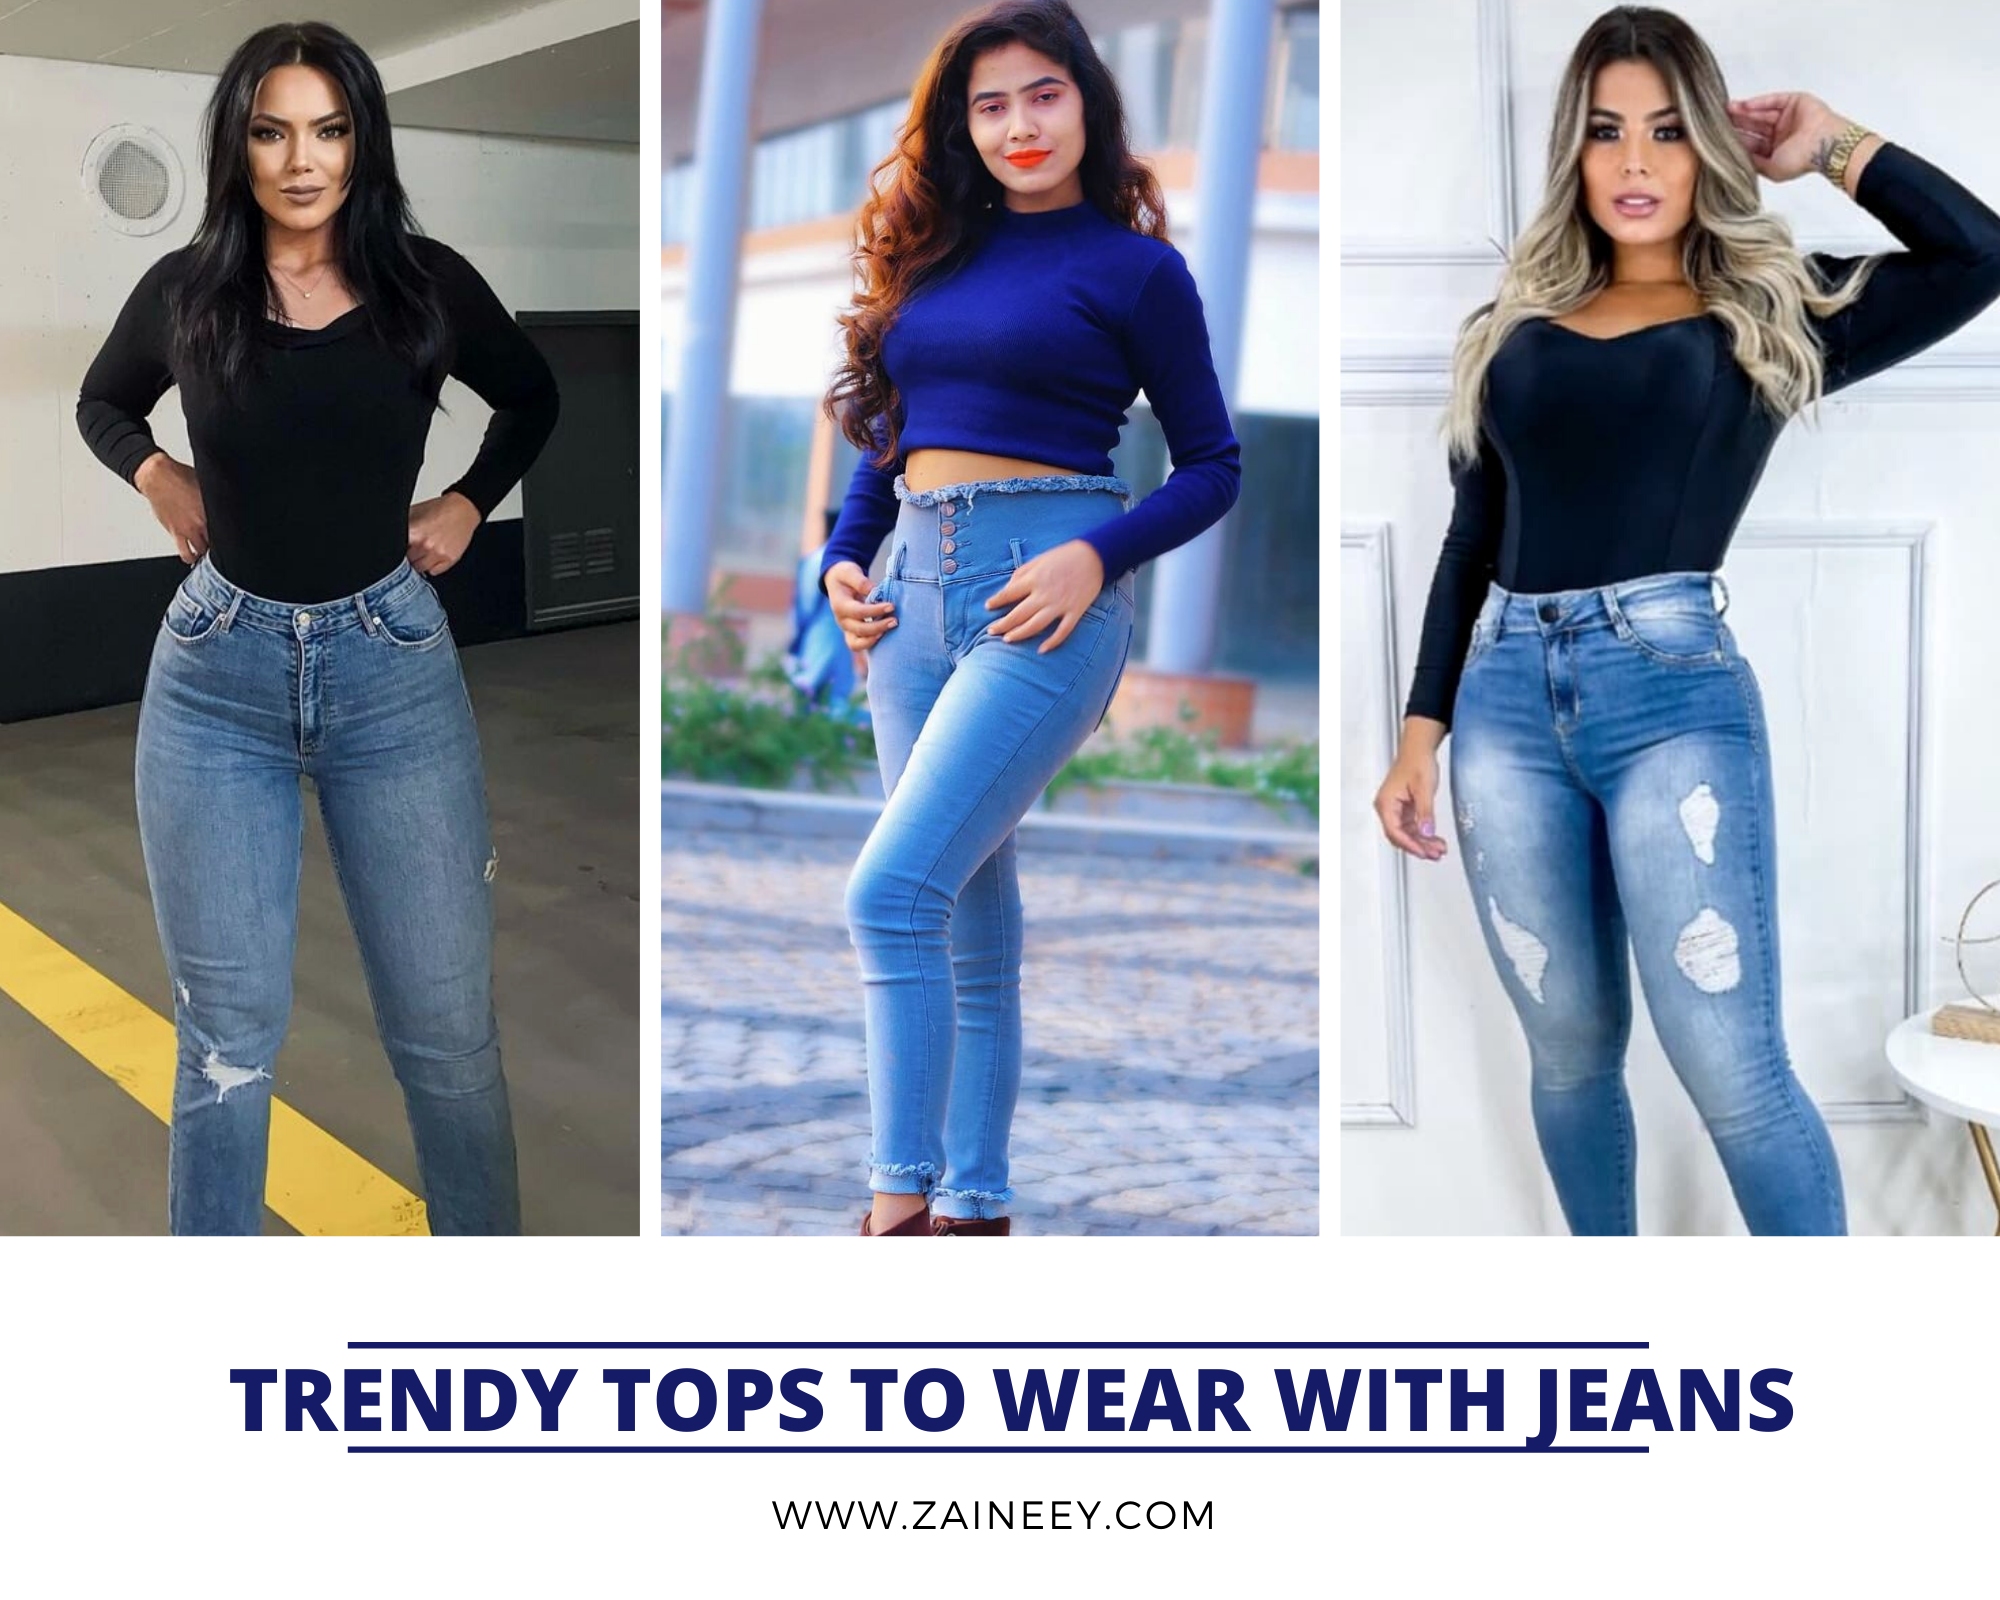 Tops To Wear With Jeans